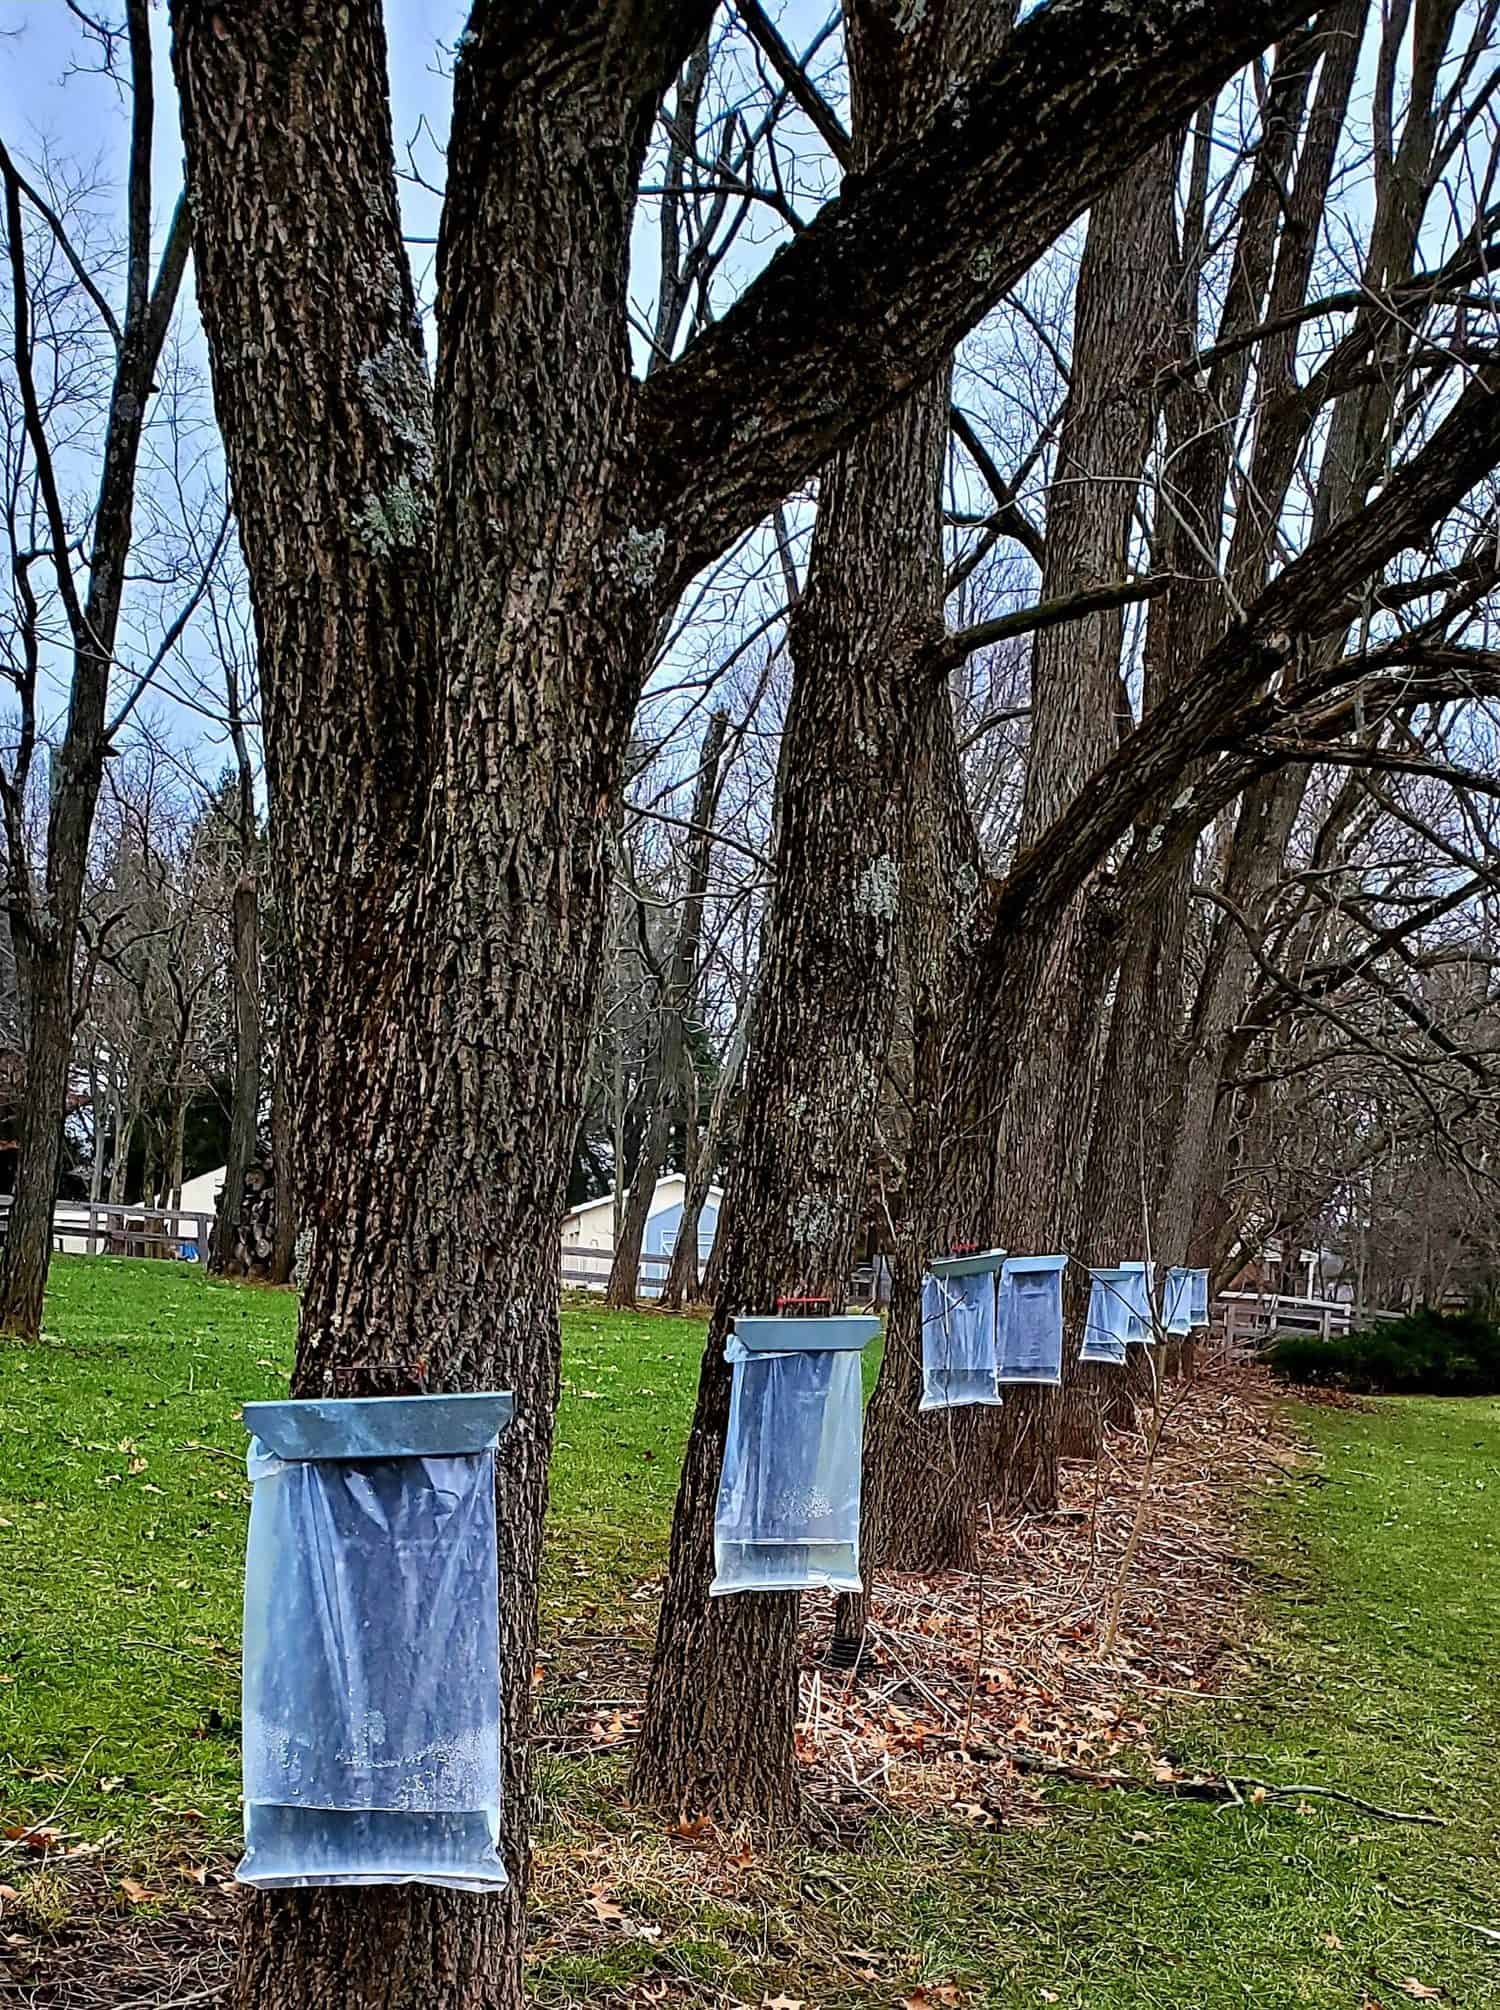 syrup tapping on Walnut trees in an Ohio grove